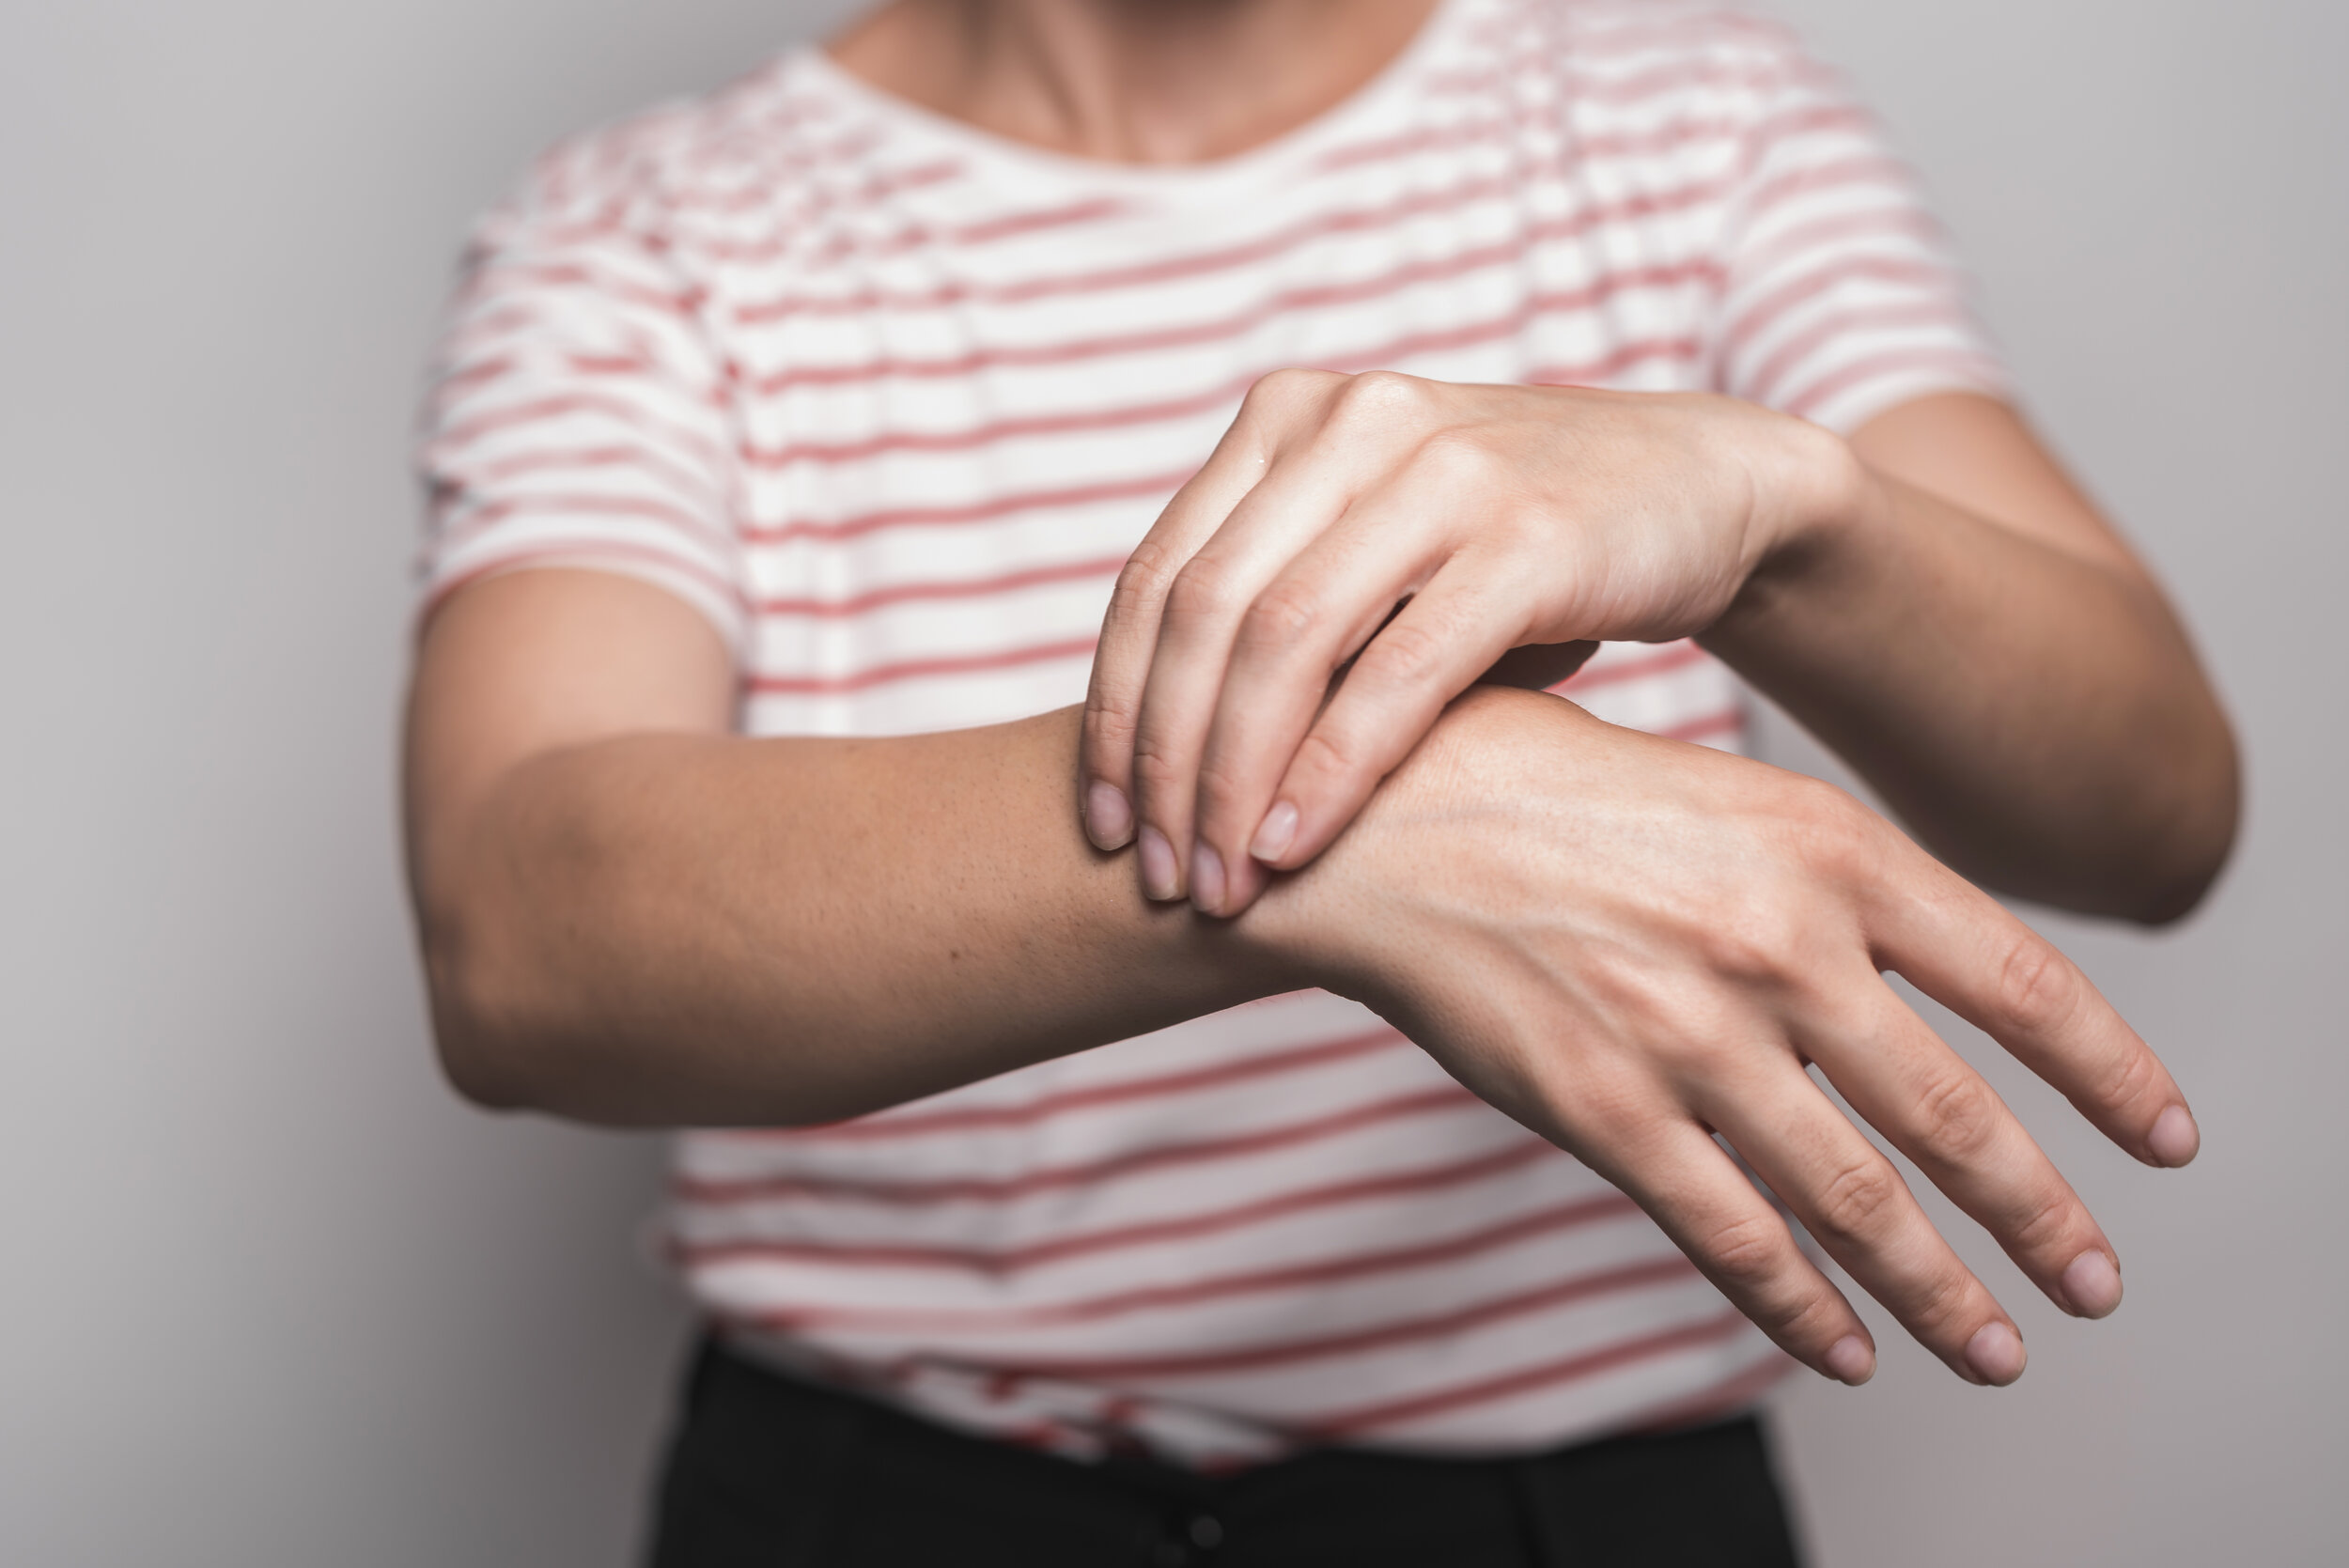 close-up-woman-having-wrist-pain-standing-against-gray-background.jpg